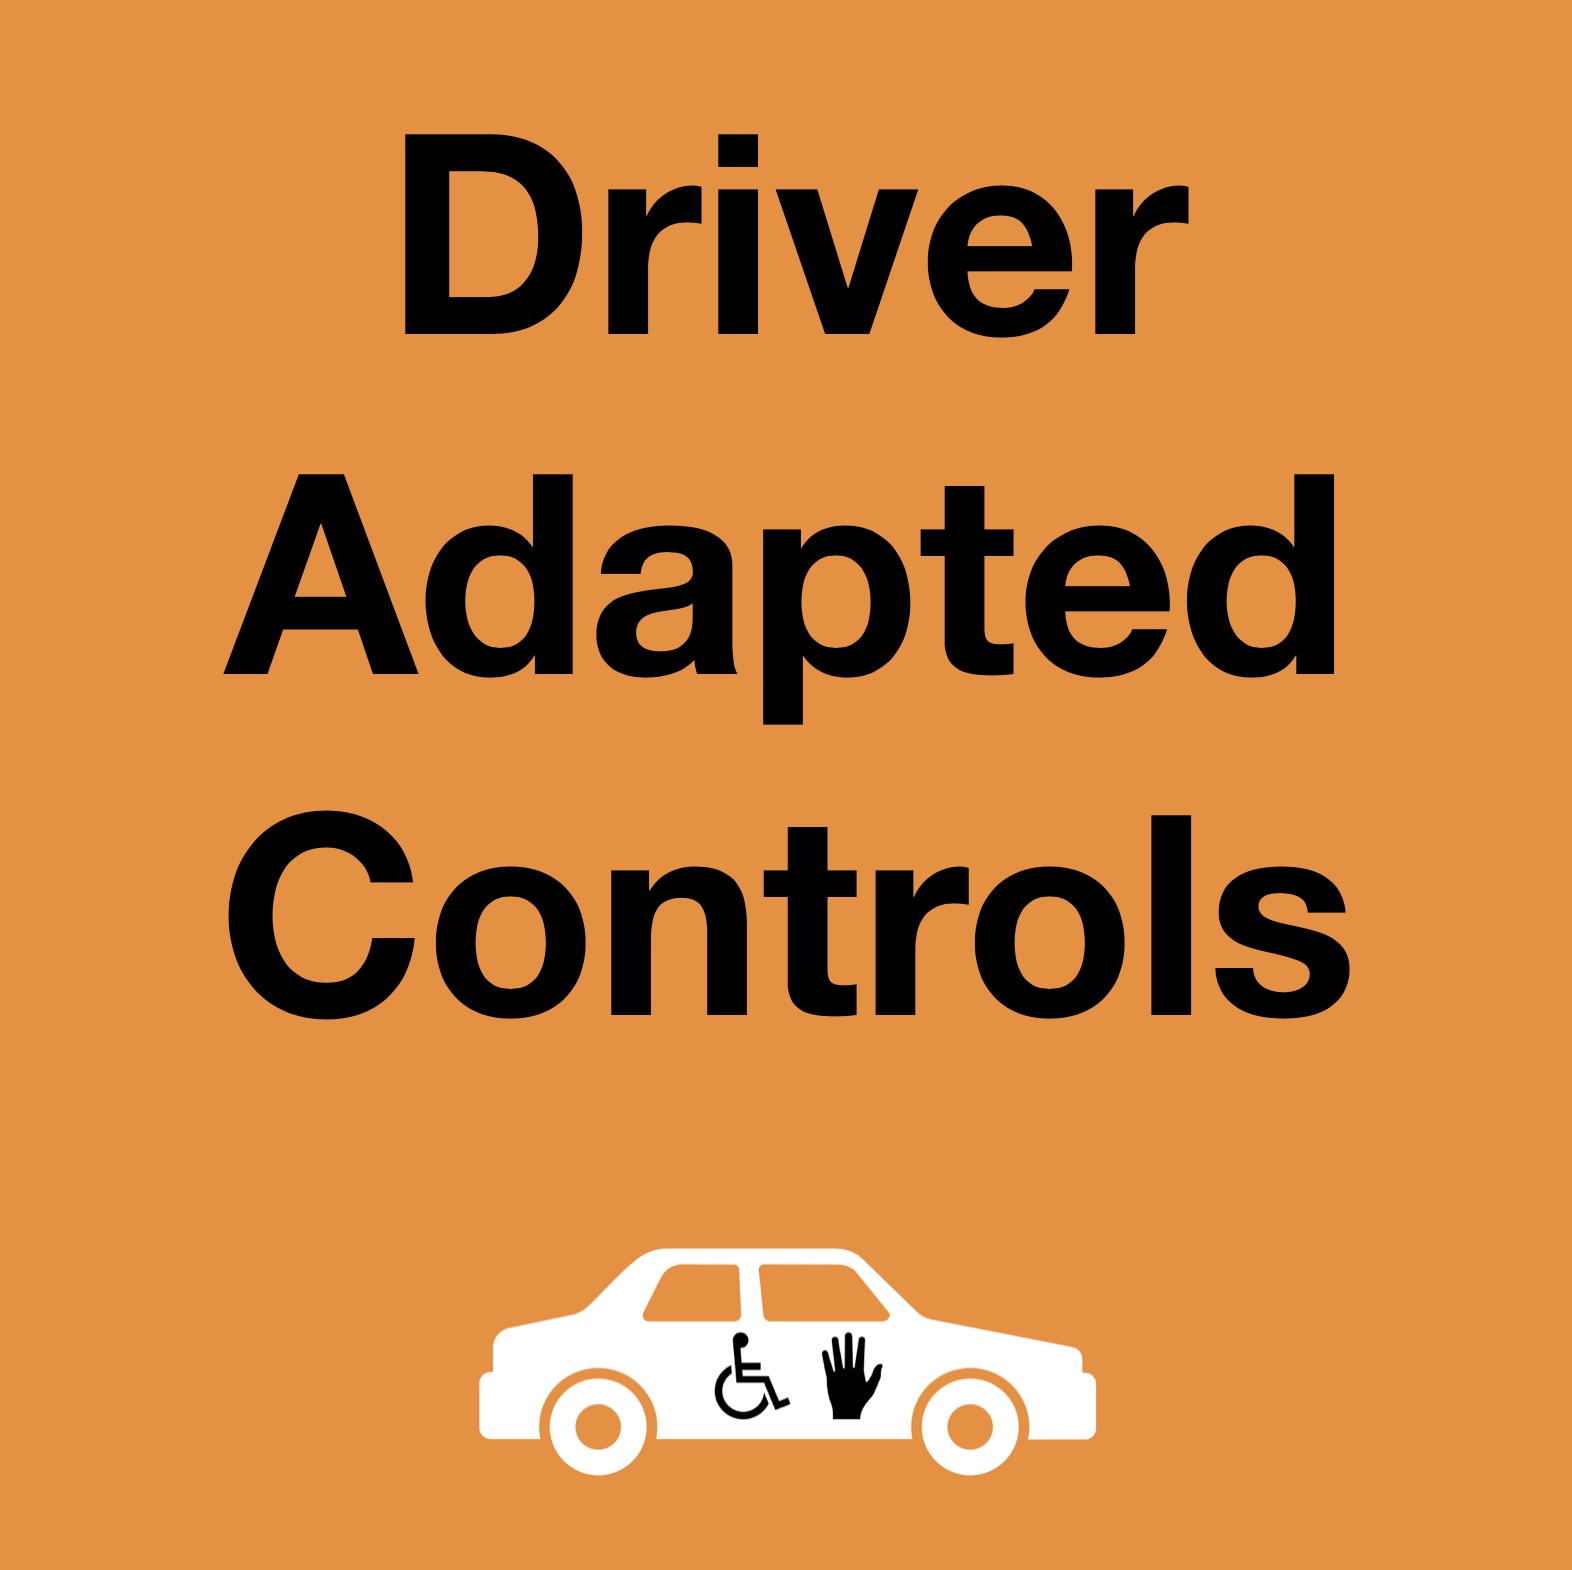 Driver Adapted Controls